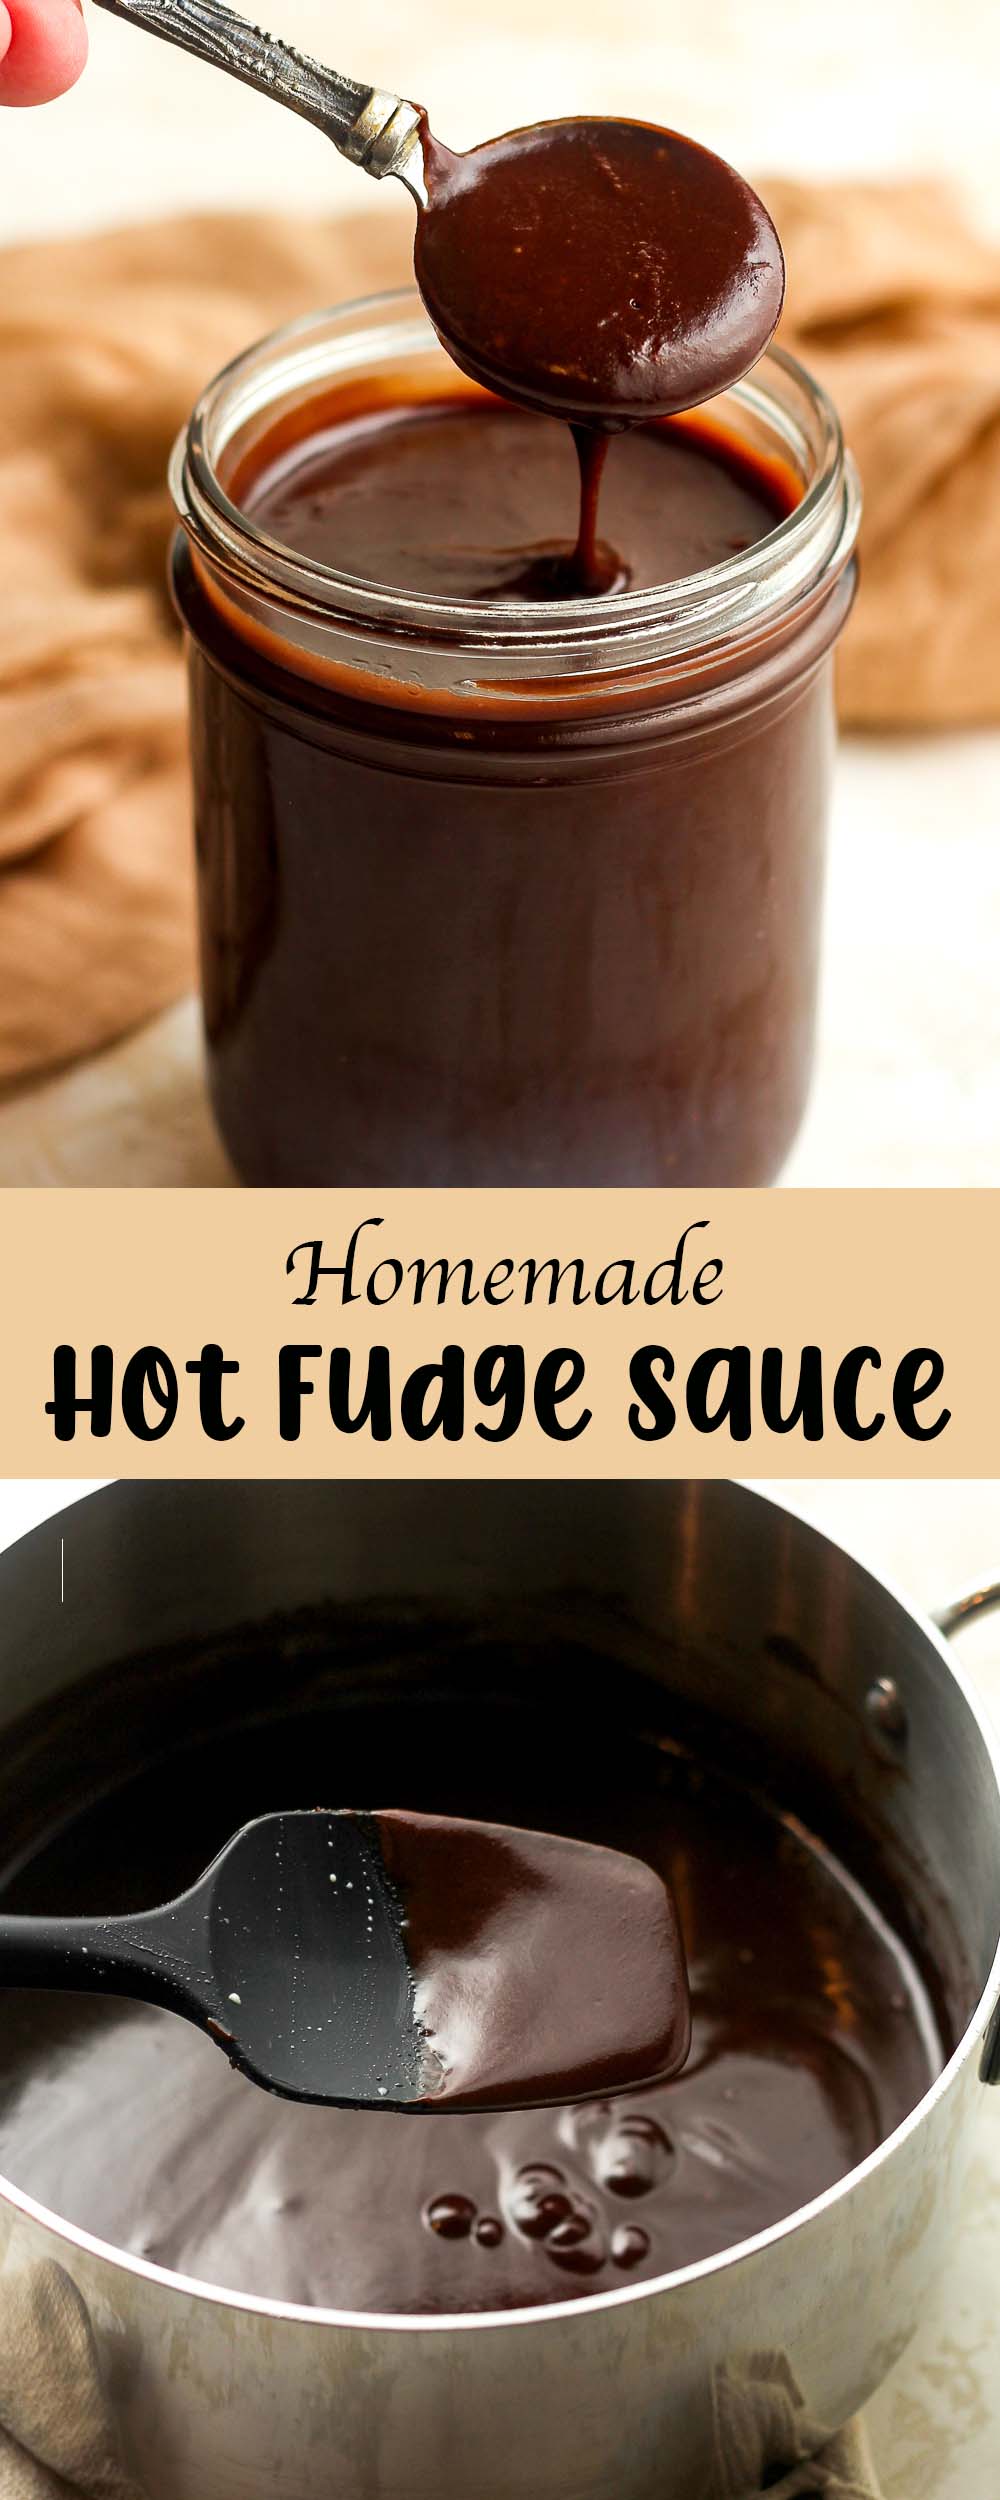 A collage of homemade hot fudge sauce.